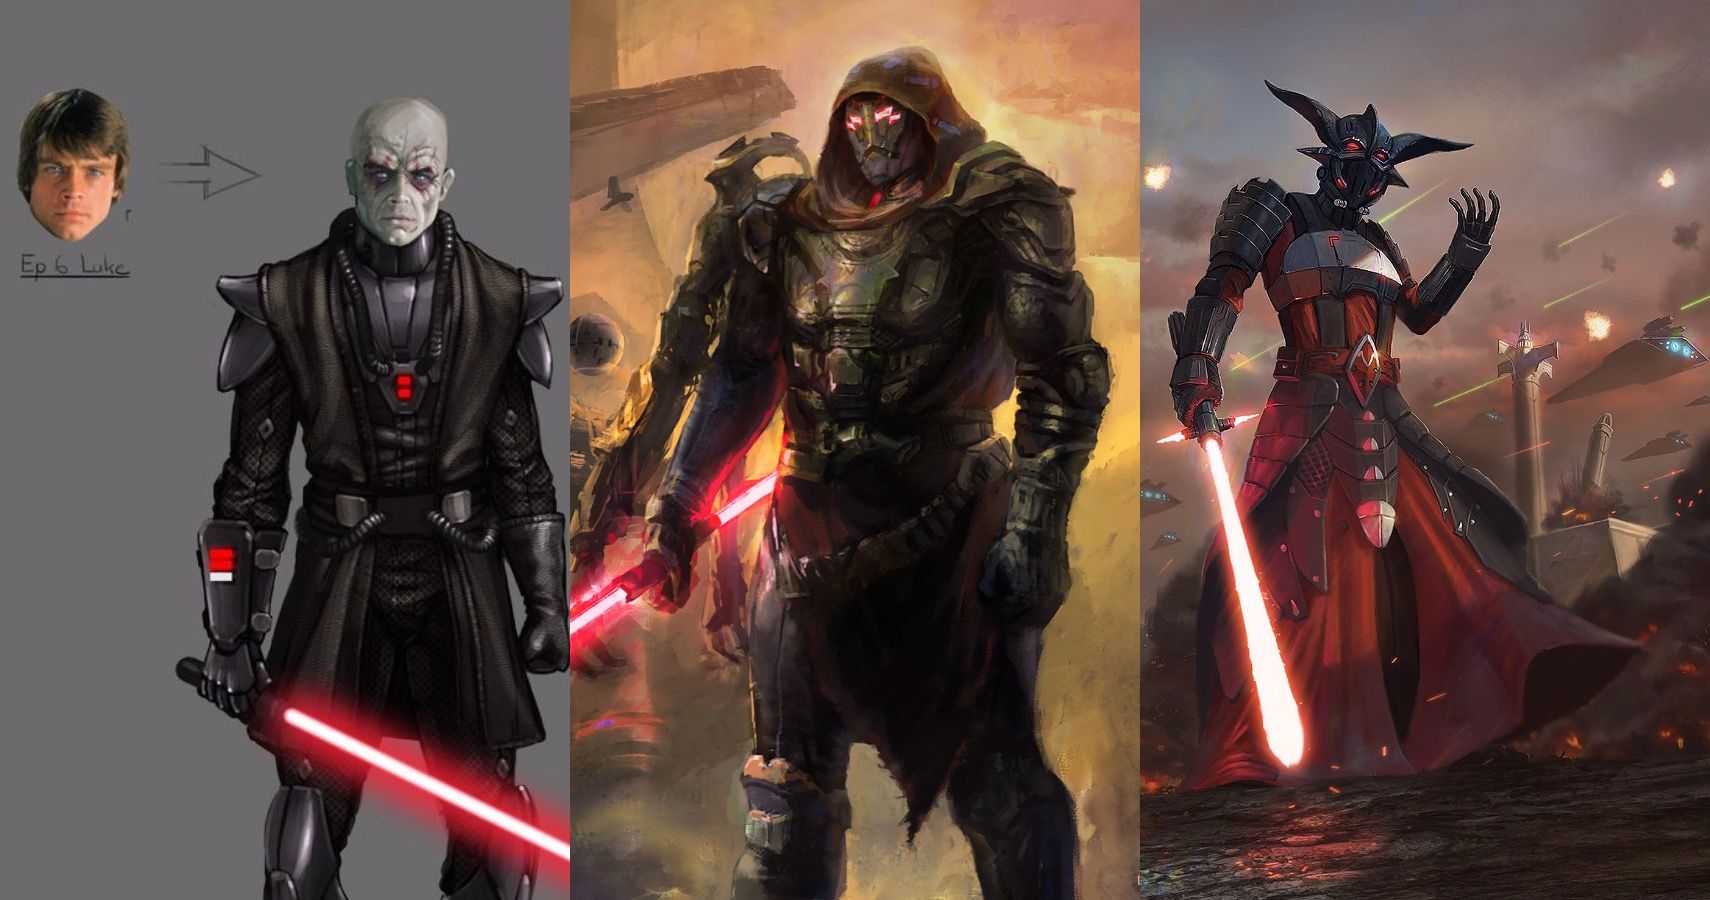 Star Wars 10 Awesome Pieces Of Sith Lord Concept Art That Bring Out